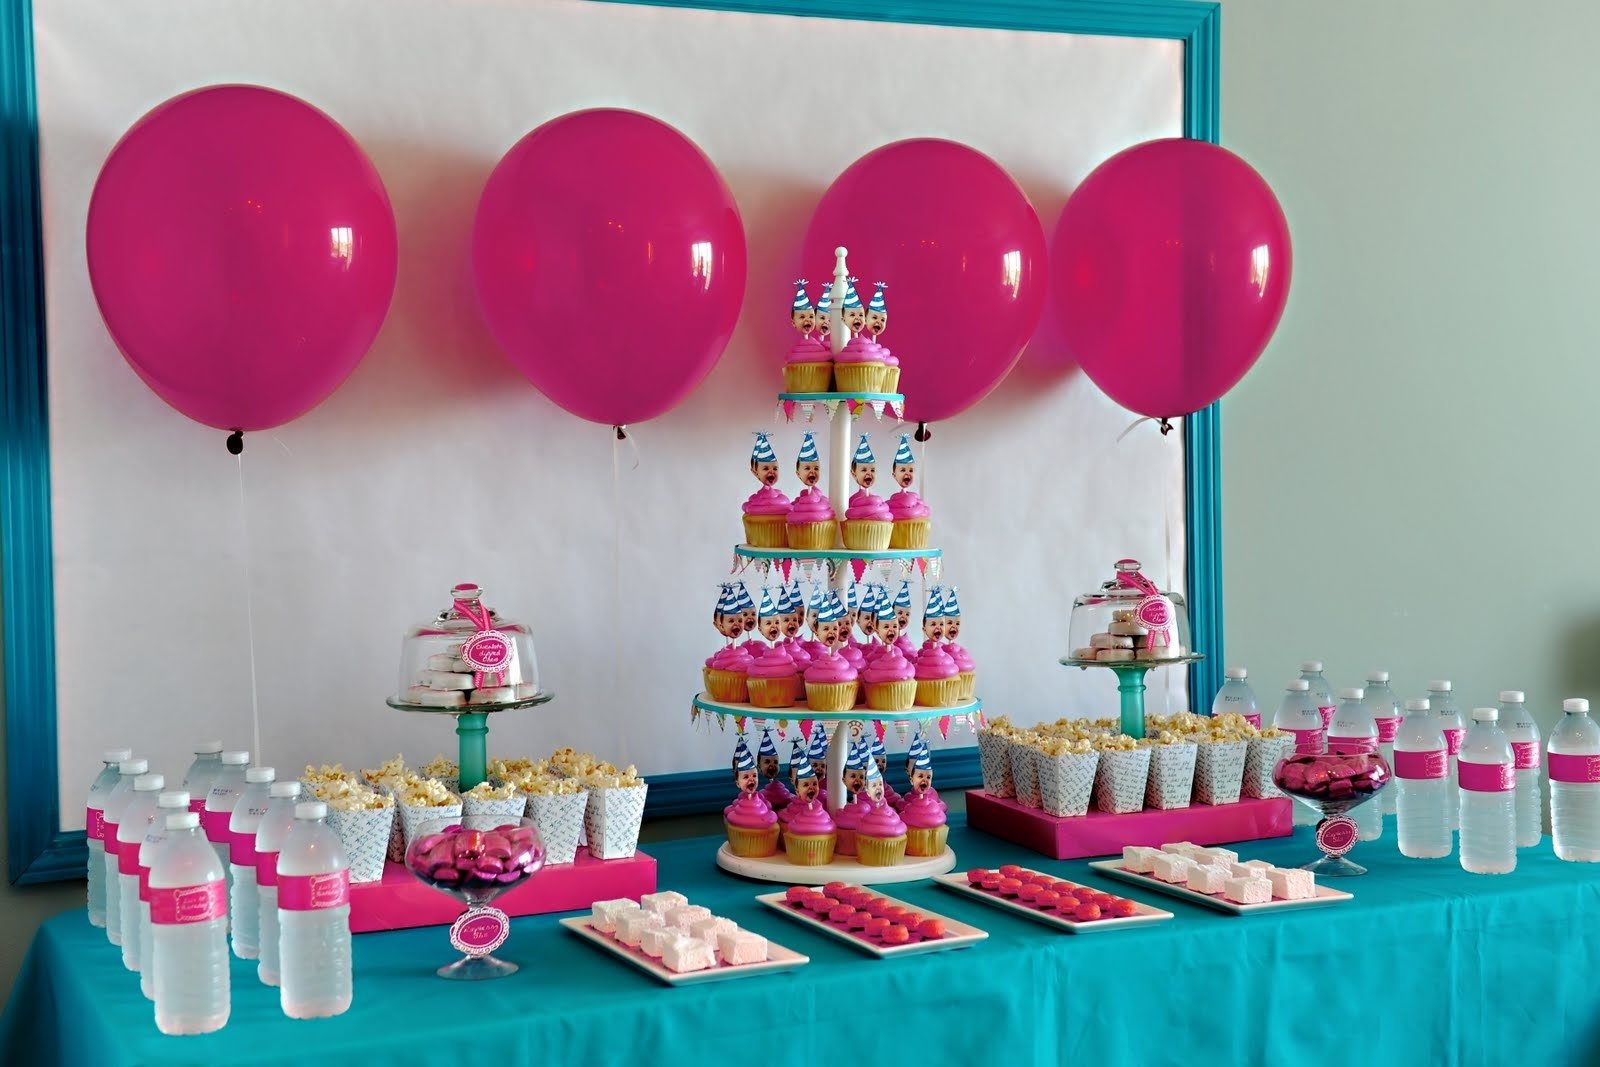 10 Most Popular Ideas For Girl Birthday Party themes birthday 4 year old little girl birthday party ideas themes 1 2022